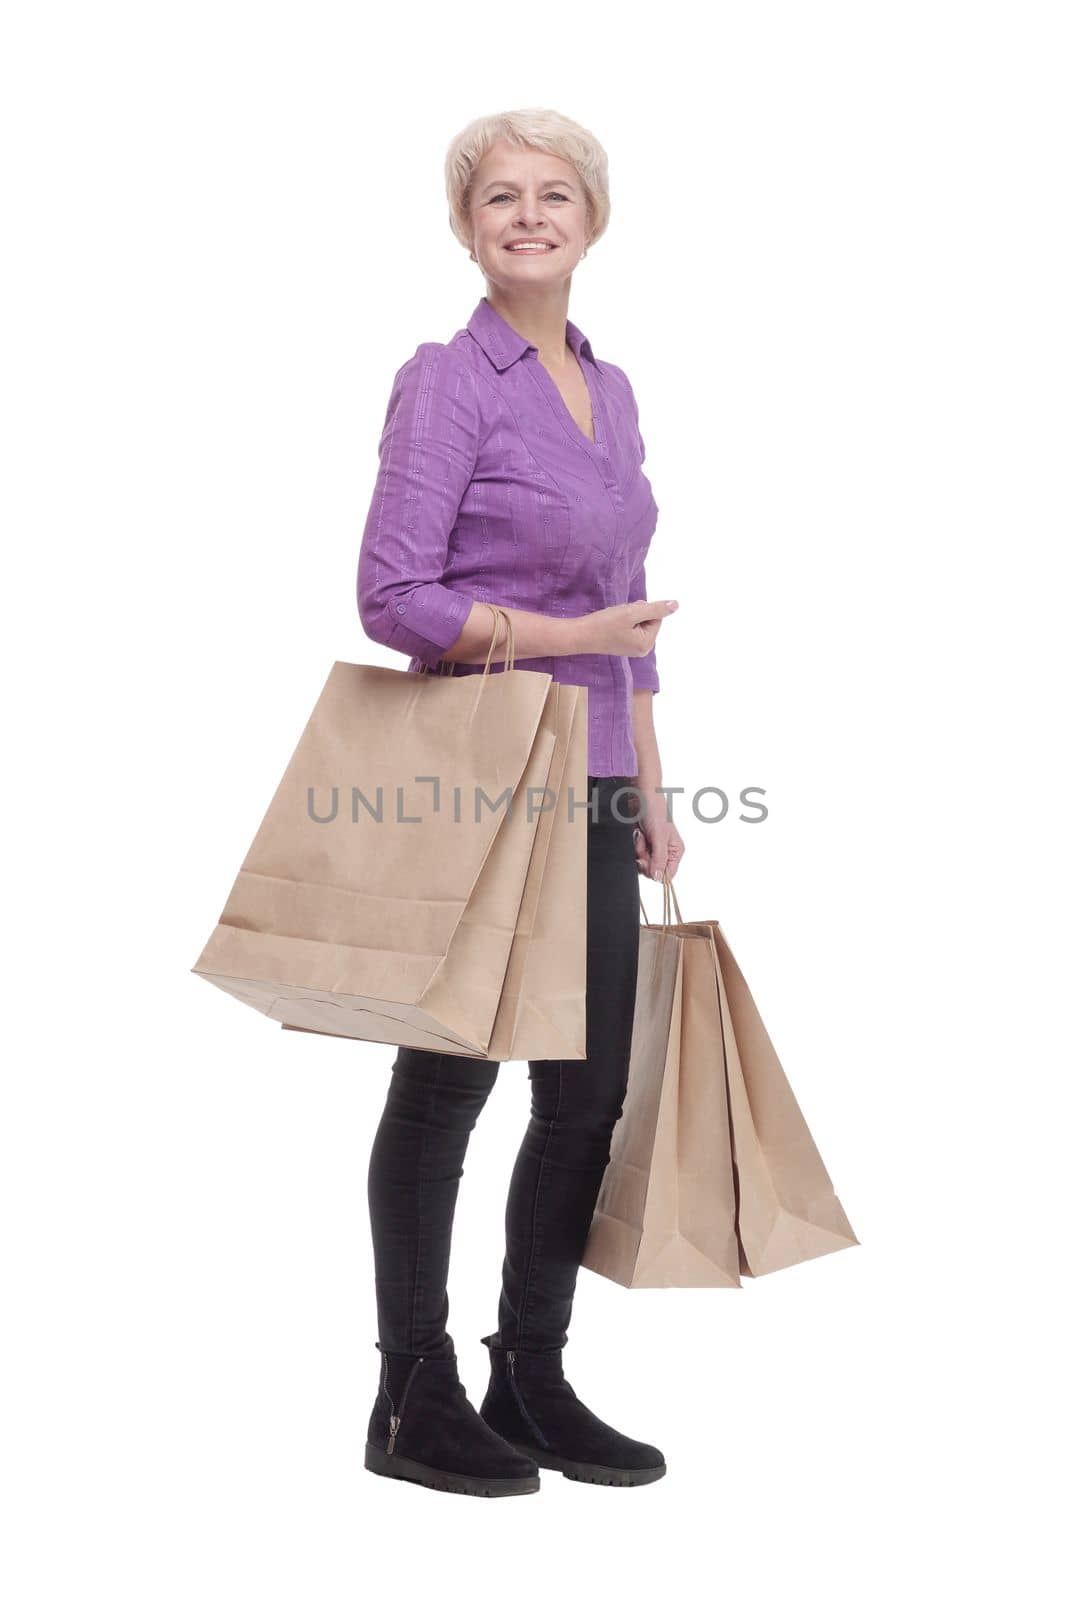 in full growth. smiling casual woman with shopping bags. by asdf